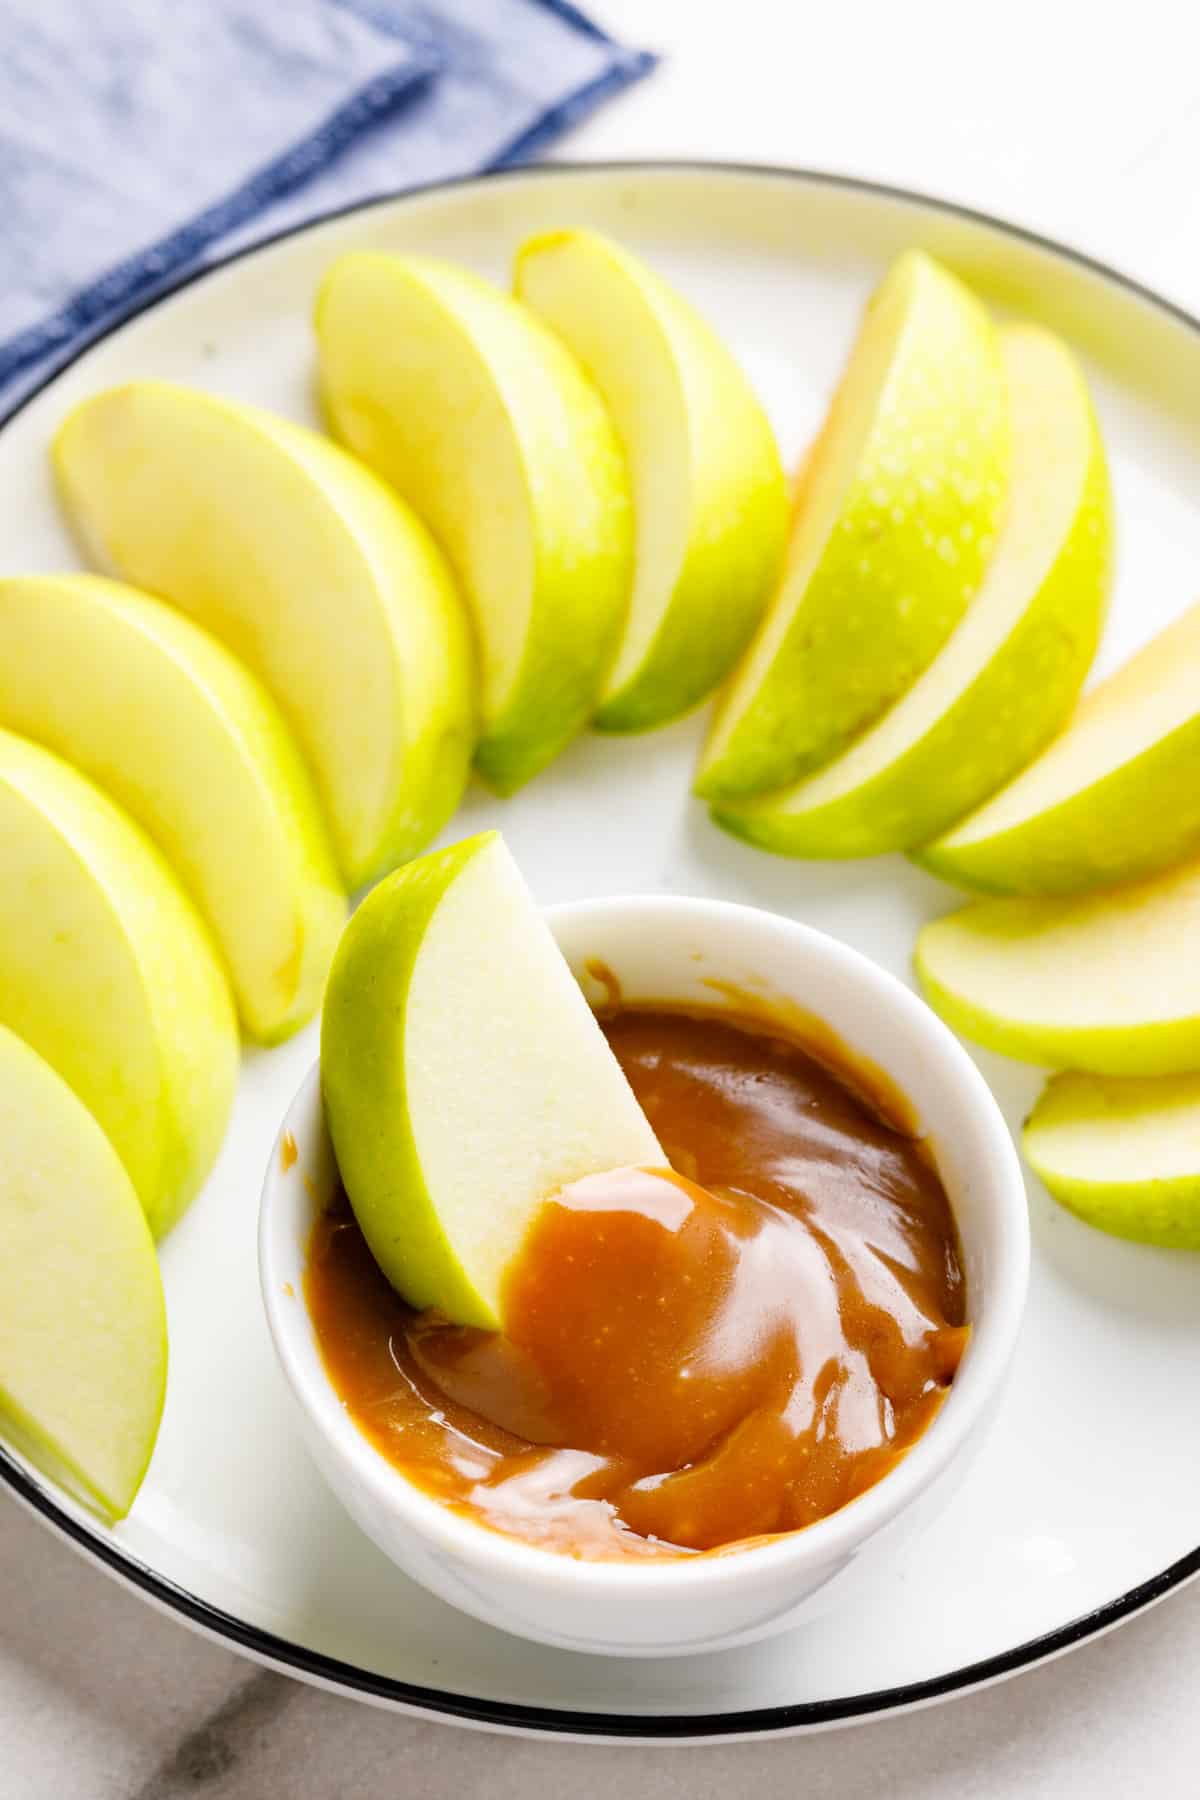 sliced granny smith apples sitting on a white round plate with a side dish of caramel sauce